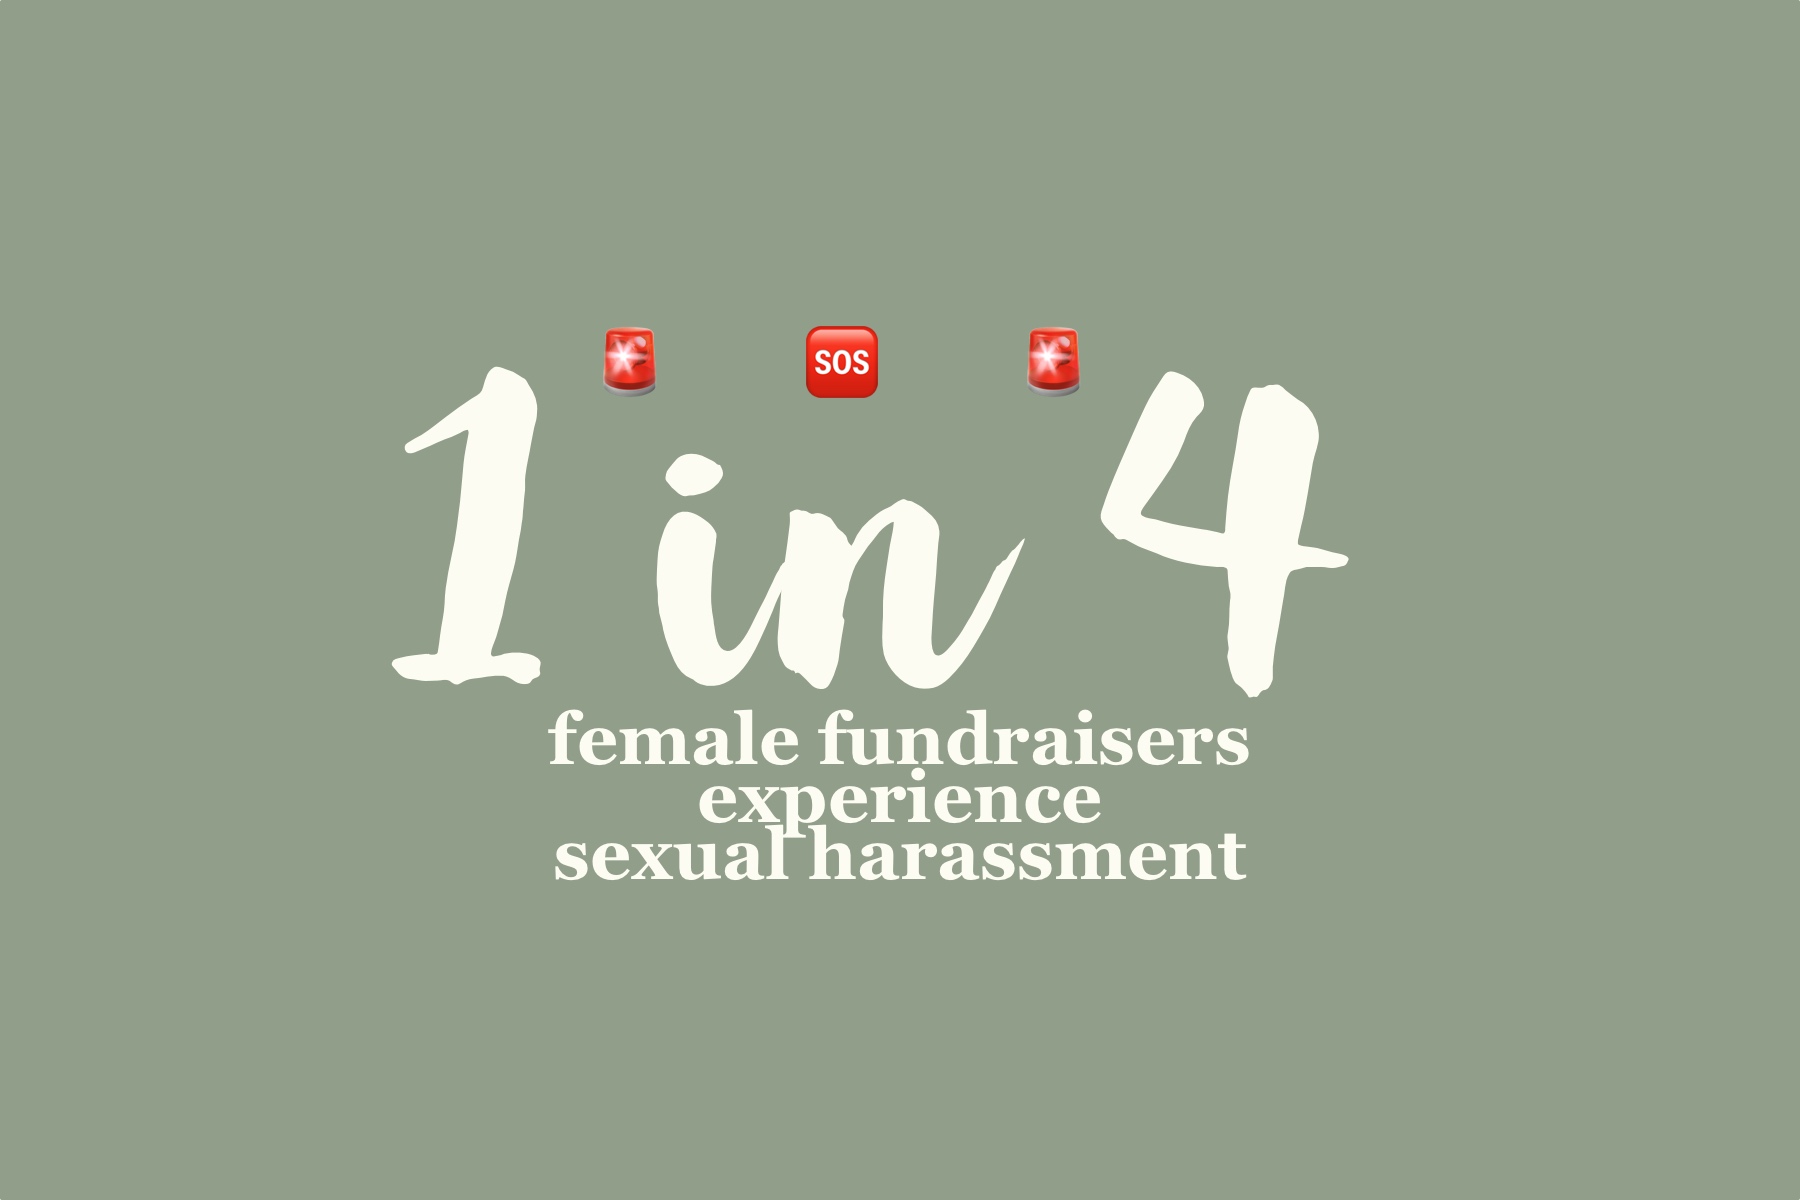 The words "1 in 4 female fundraisers experience sexual harassment"